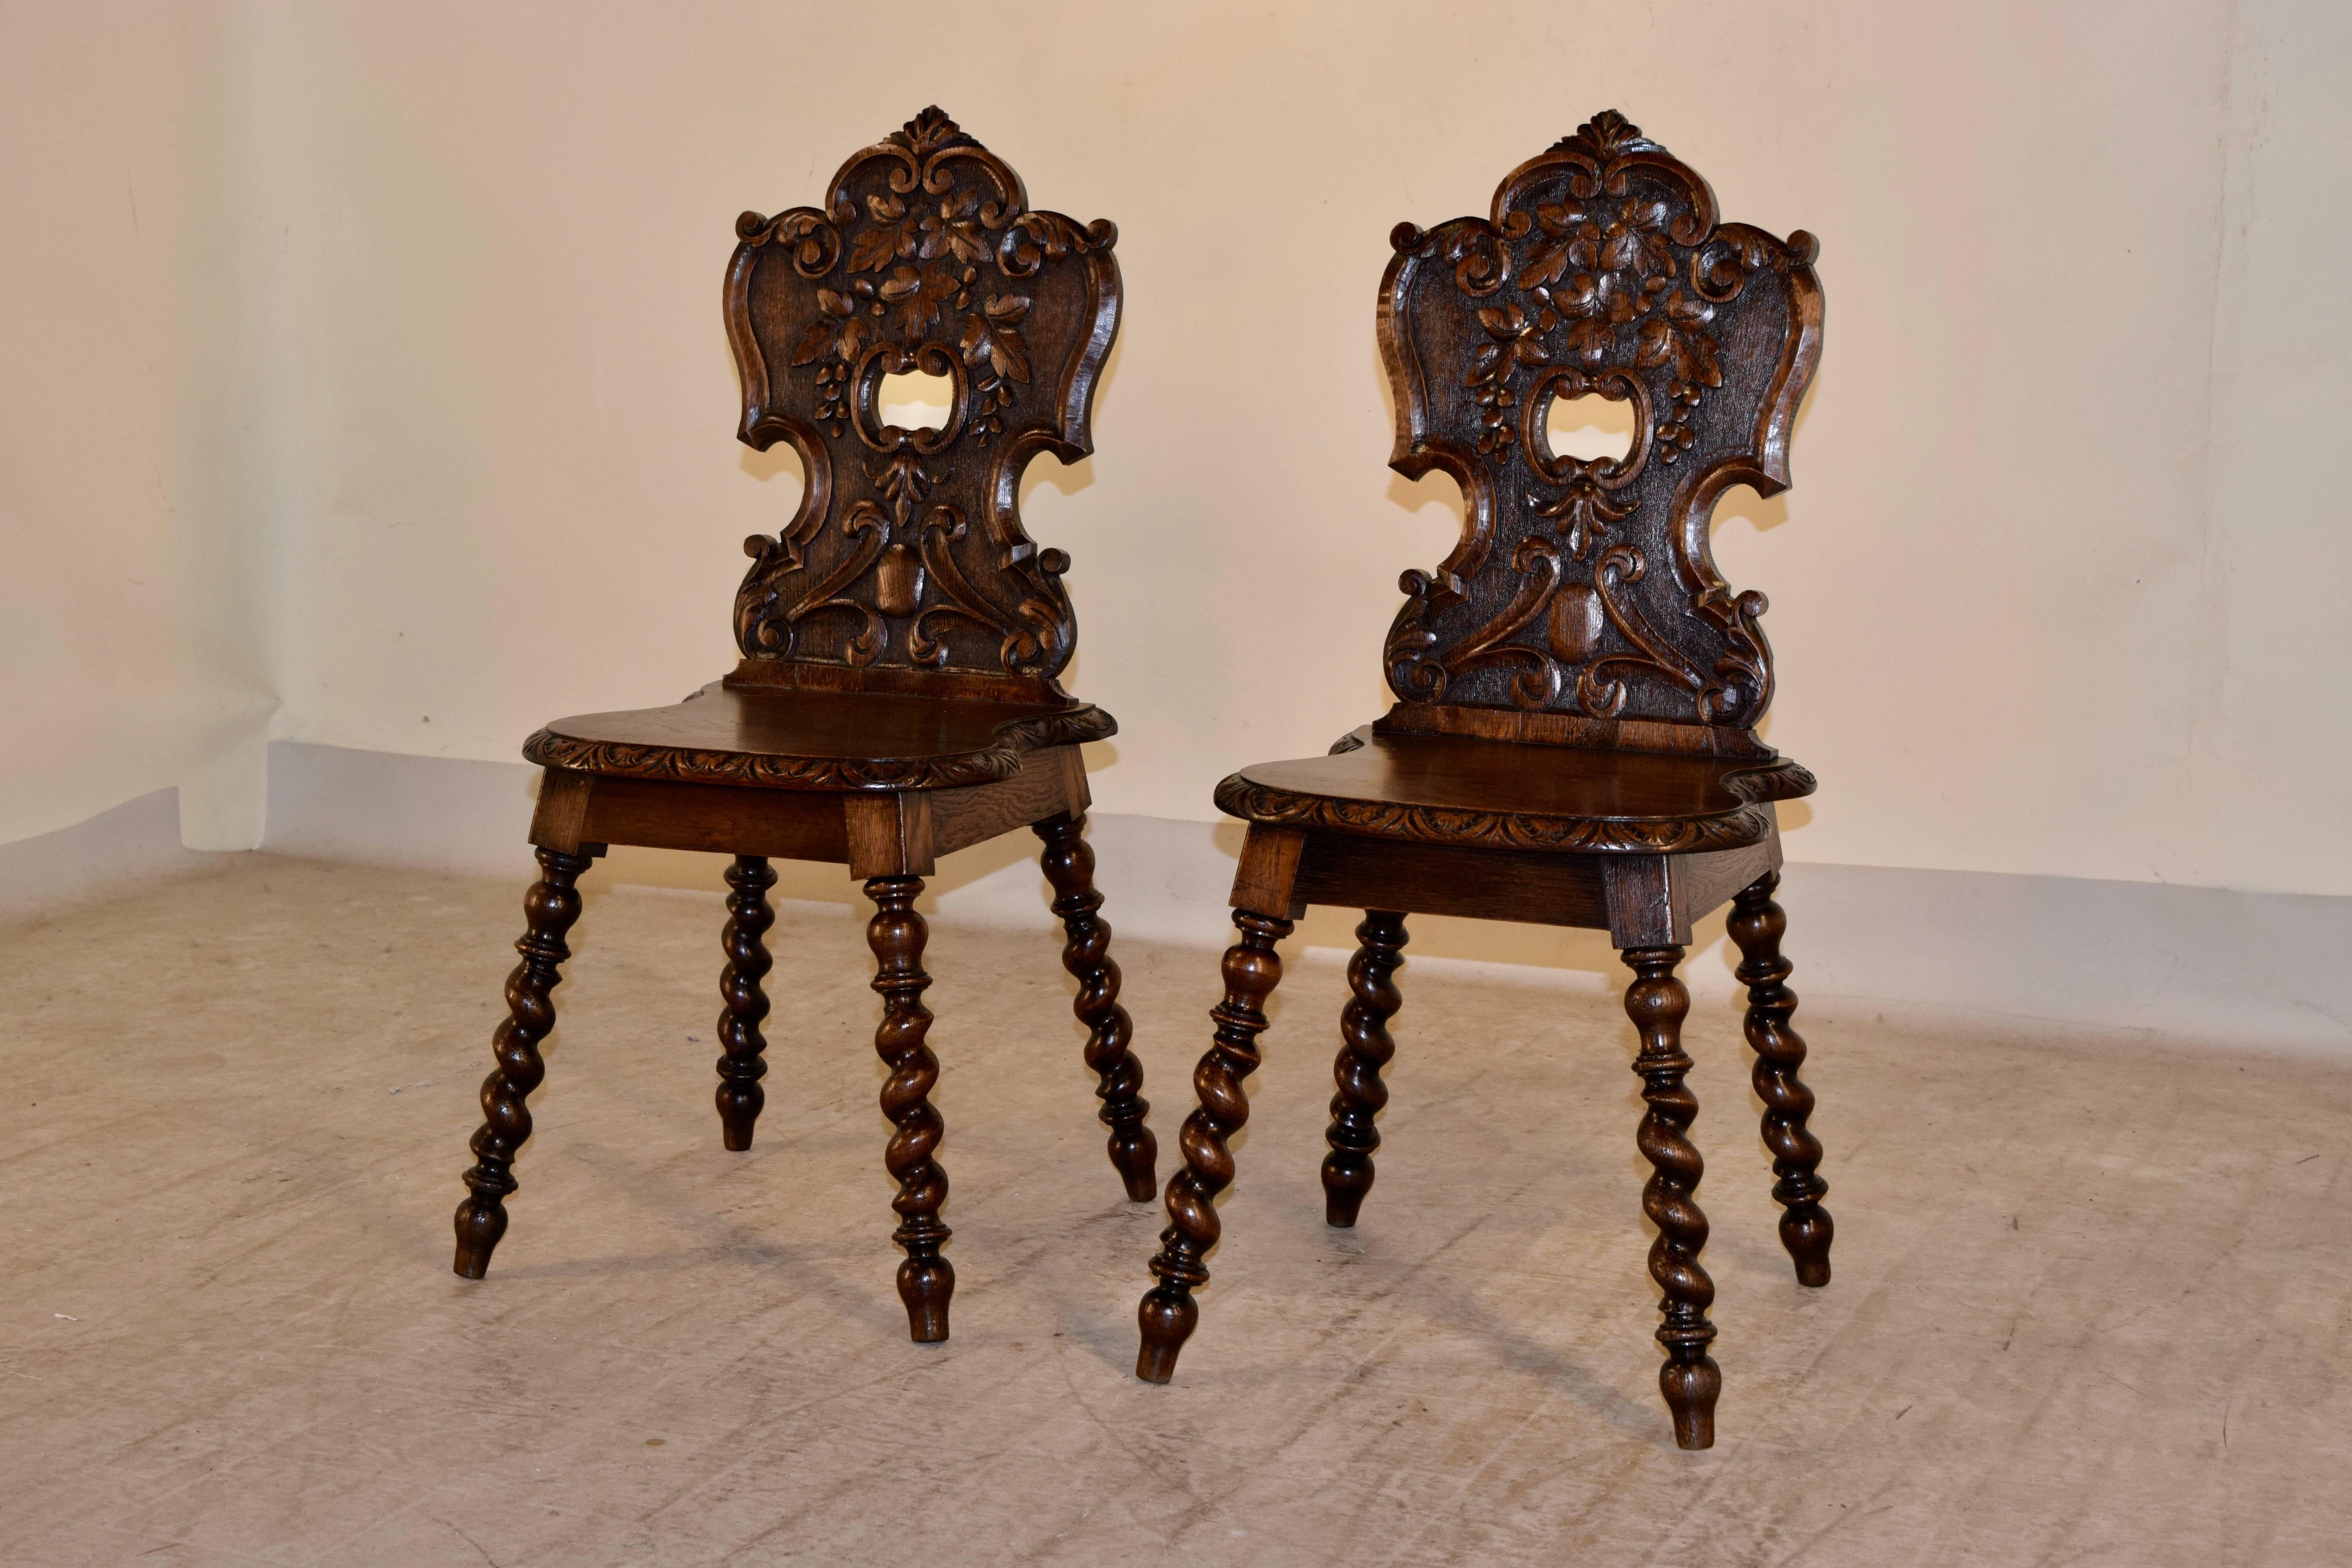 19th century pair of carved oak hall chairs from England. The backs are shield shaped and have a central piercing. They are carved with leaves. The seats have beveled and gadrooned edges, and have simple aprons. They are supported on hand-turned